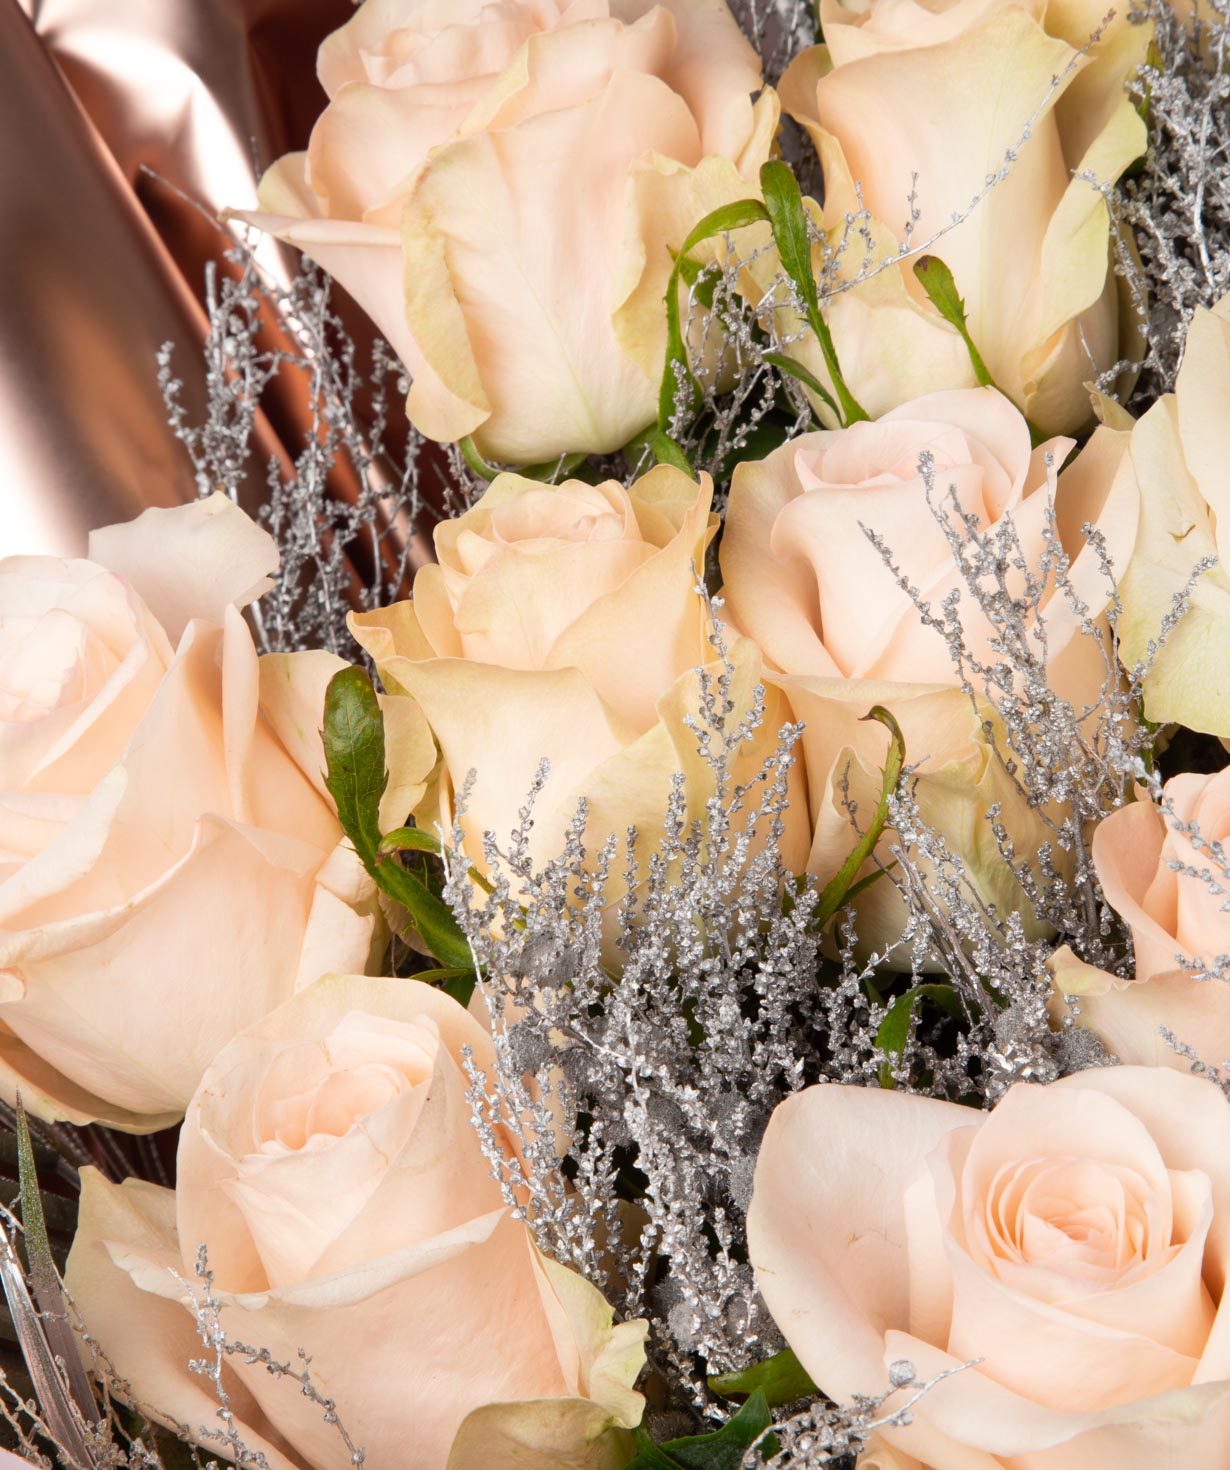 Bouquet `Maysville` with roses and dry flowers